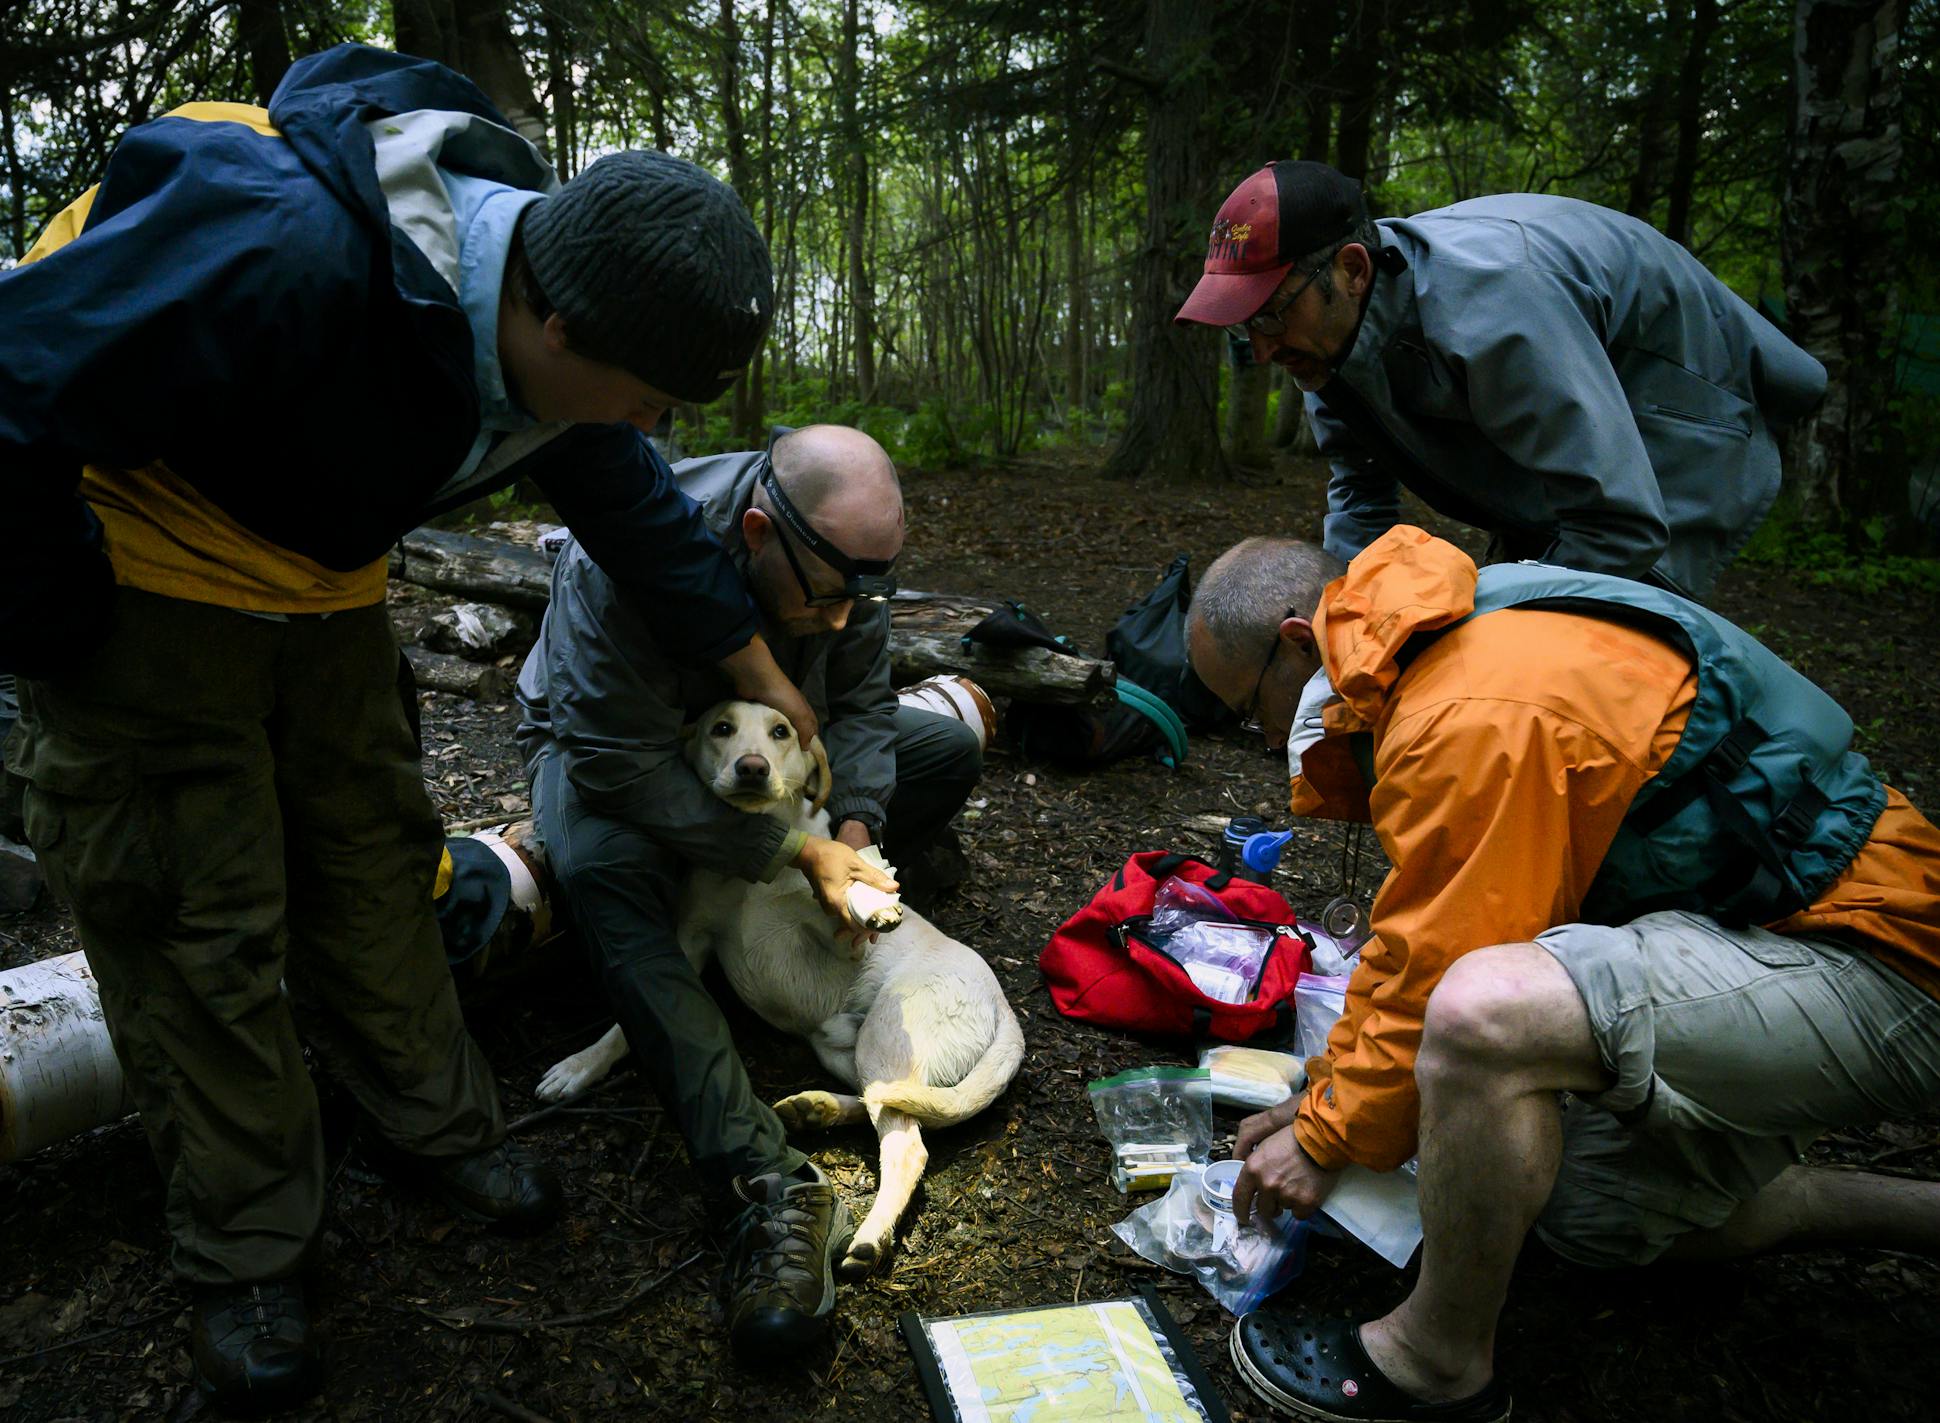 Tony Jones held his dog, Crosby, as Brad Shannon, lower right, cleaned a gash and bandaged it. Crosby suffered the cut on a boulder field.